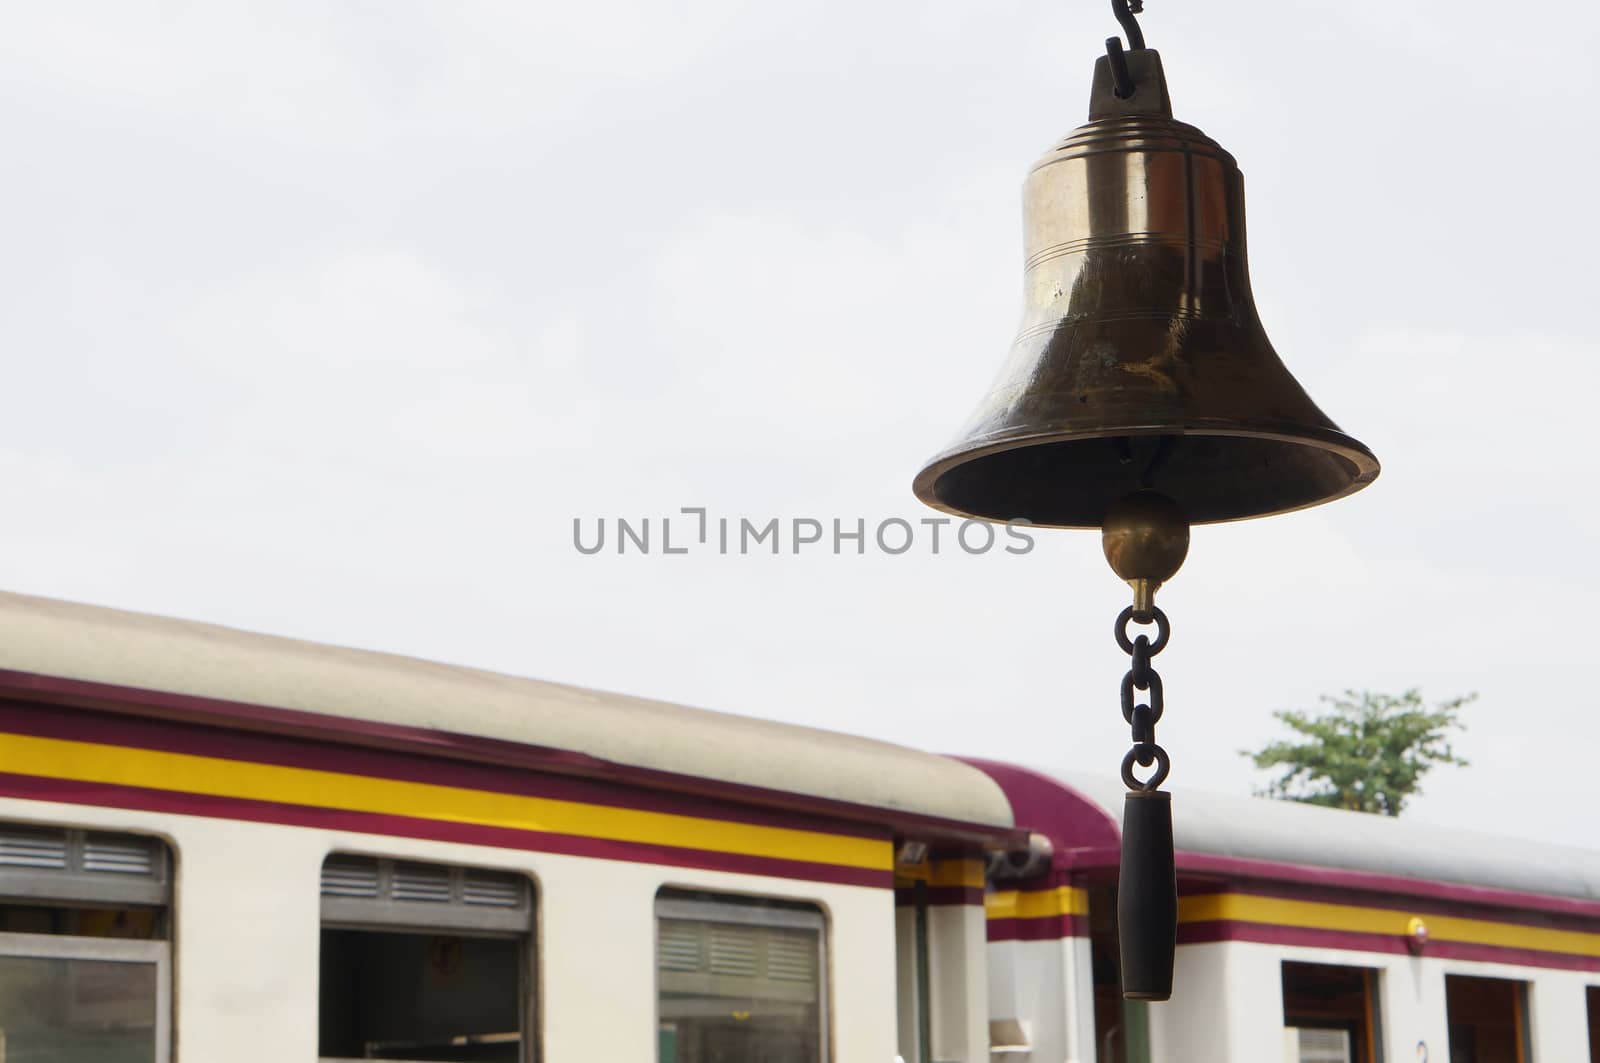 Thai traditional golden bell at train station in afternoon on bogie background.